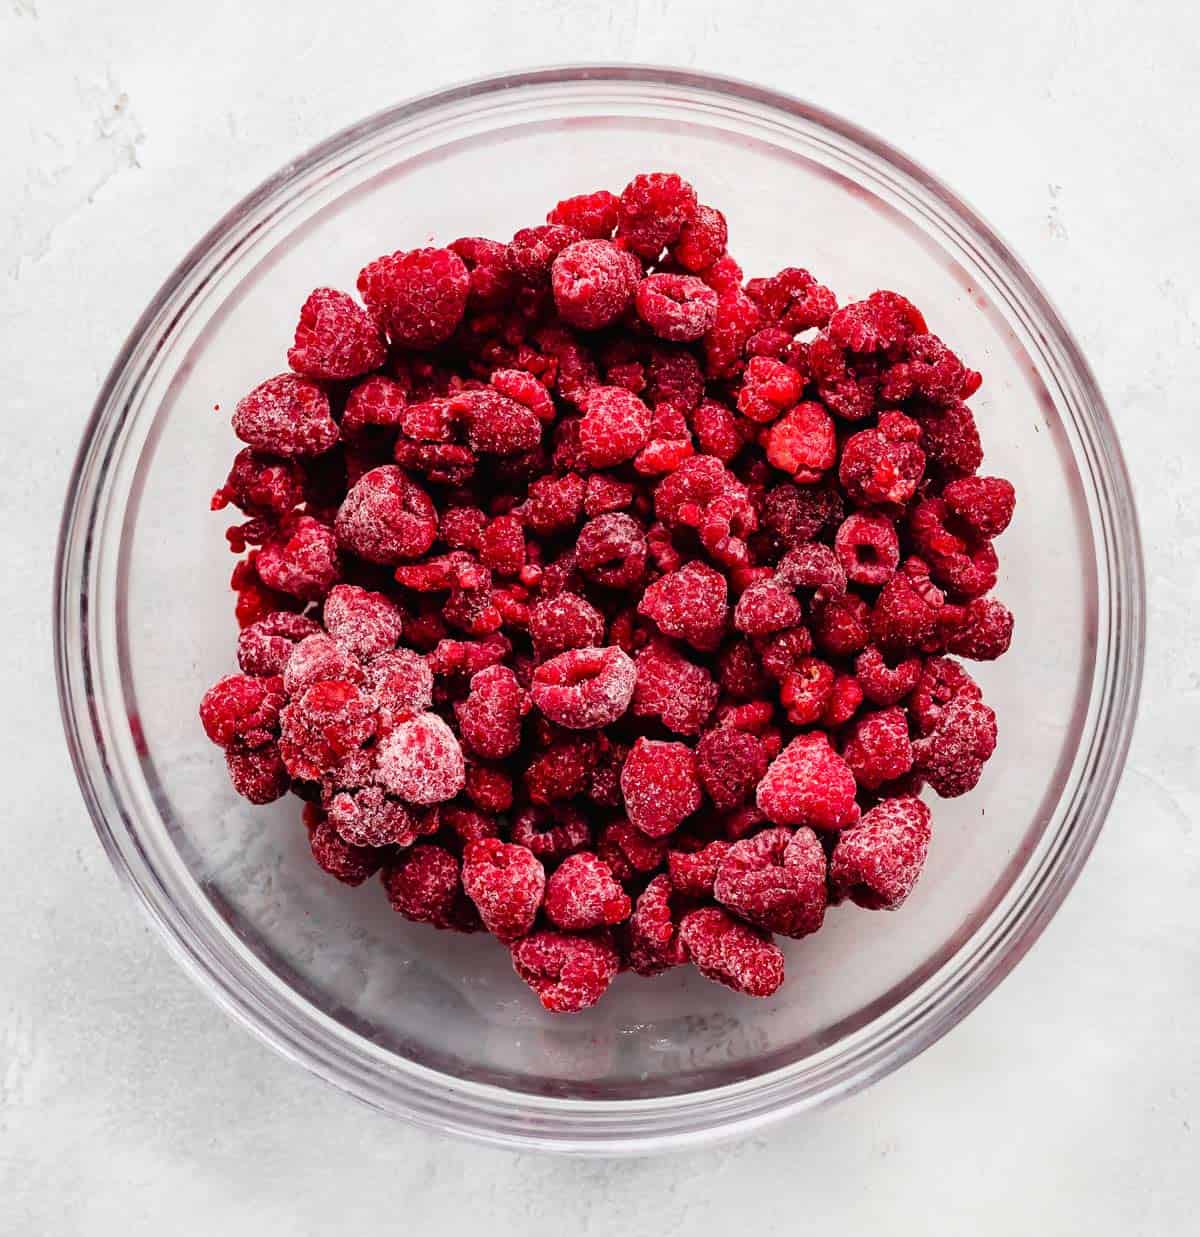 Frozen raspberries in a glass bowl on a white background.